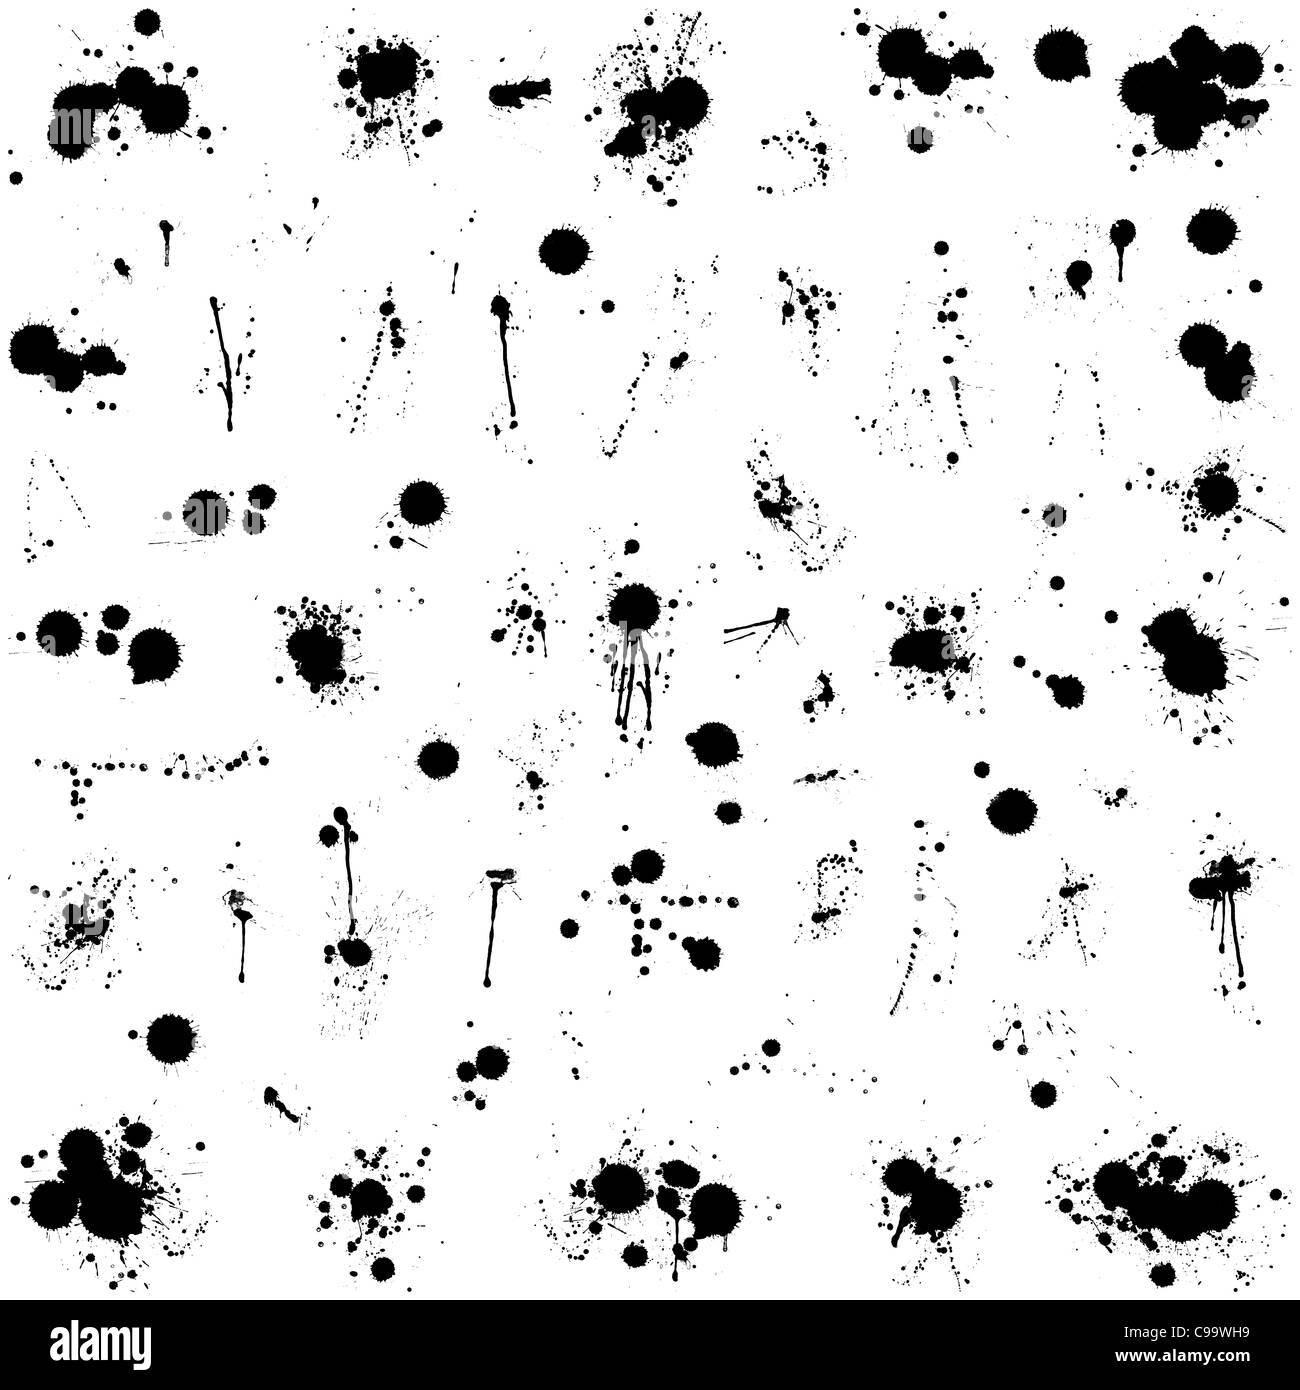 A large collection of unique, original and highly detailed splats, drips, drops and sprays. Stock Photo